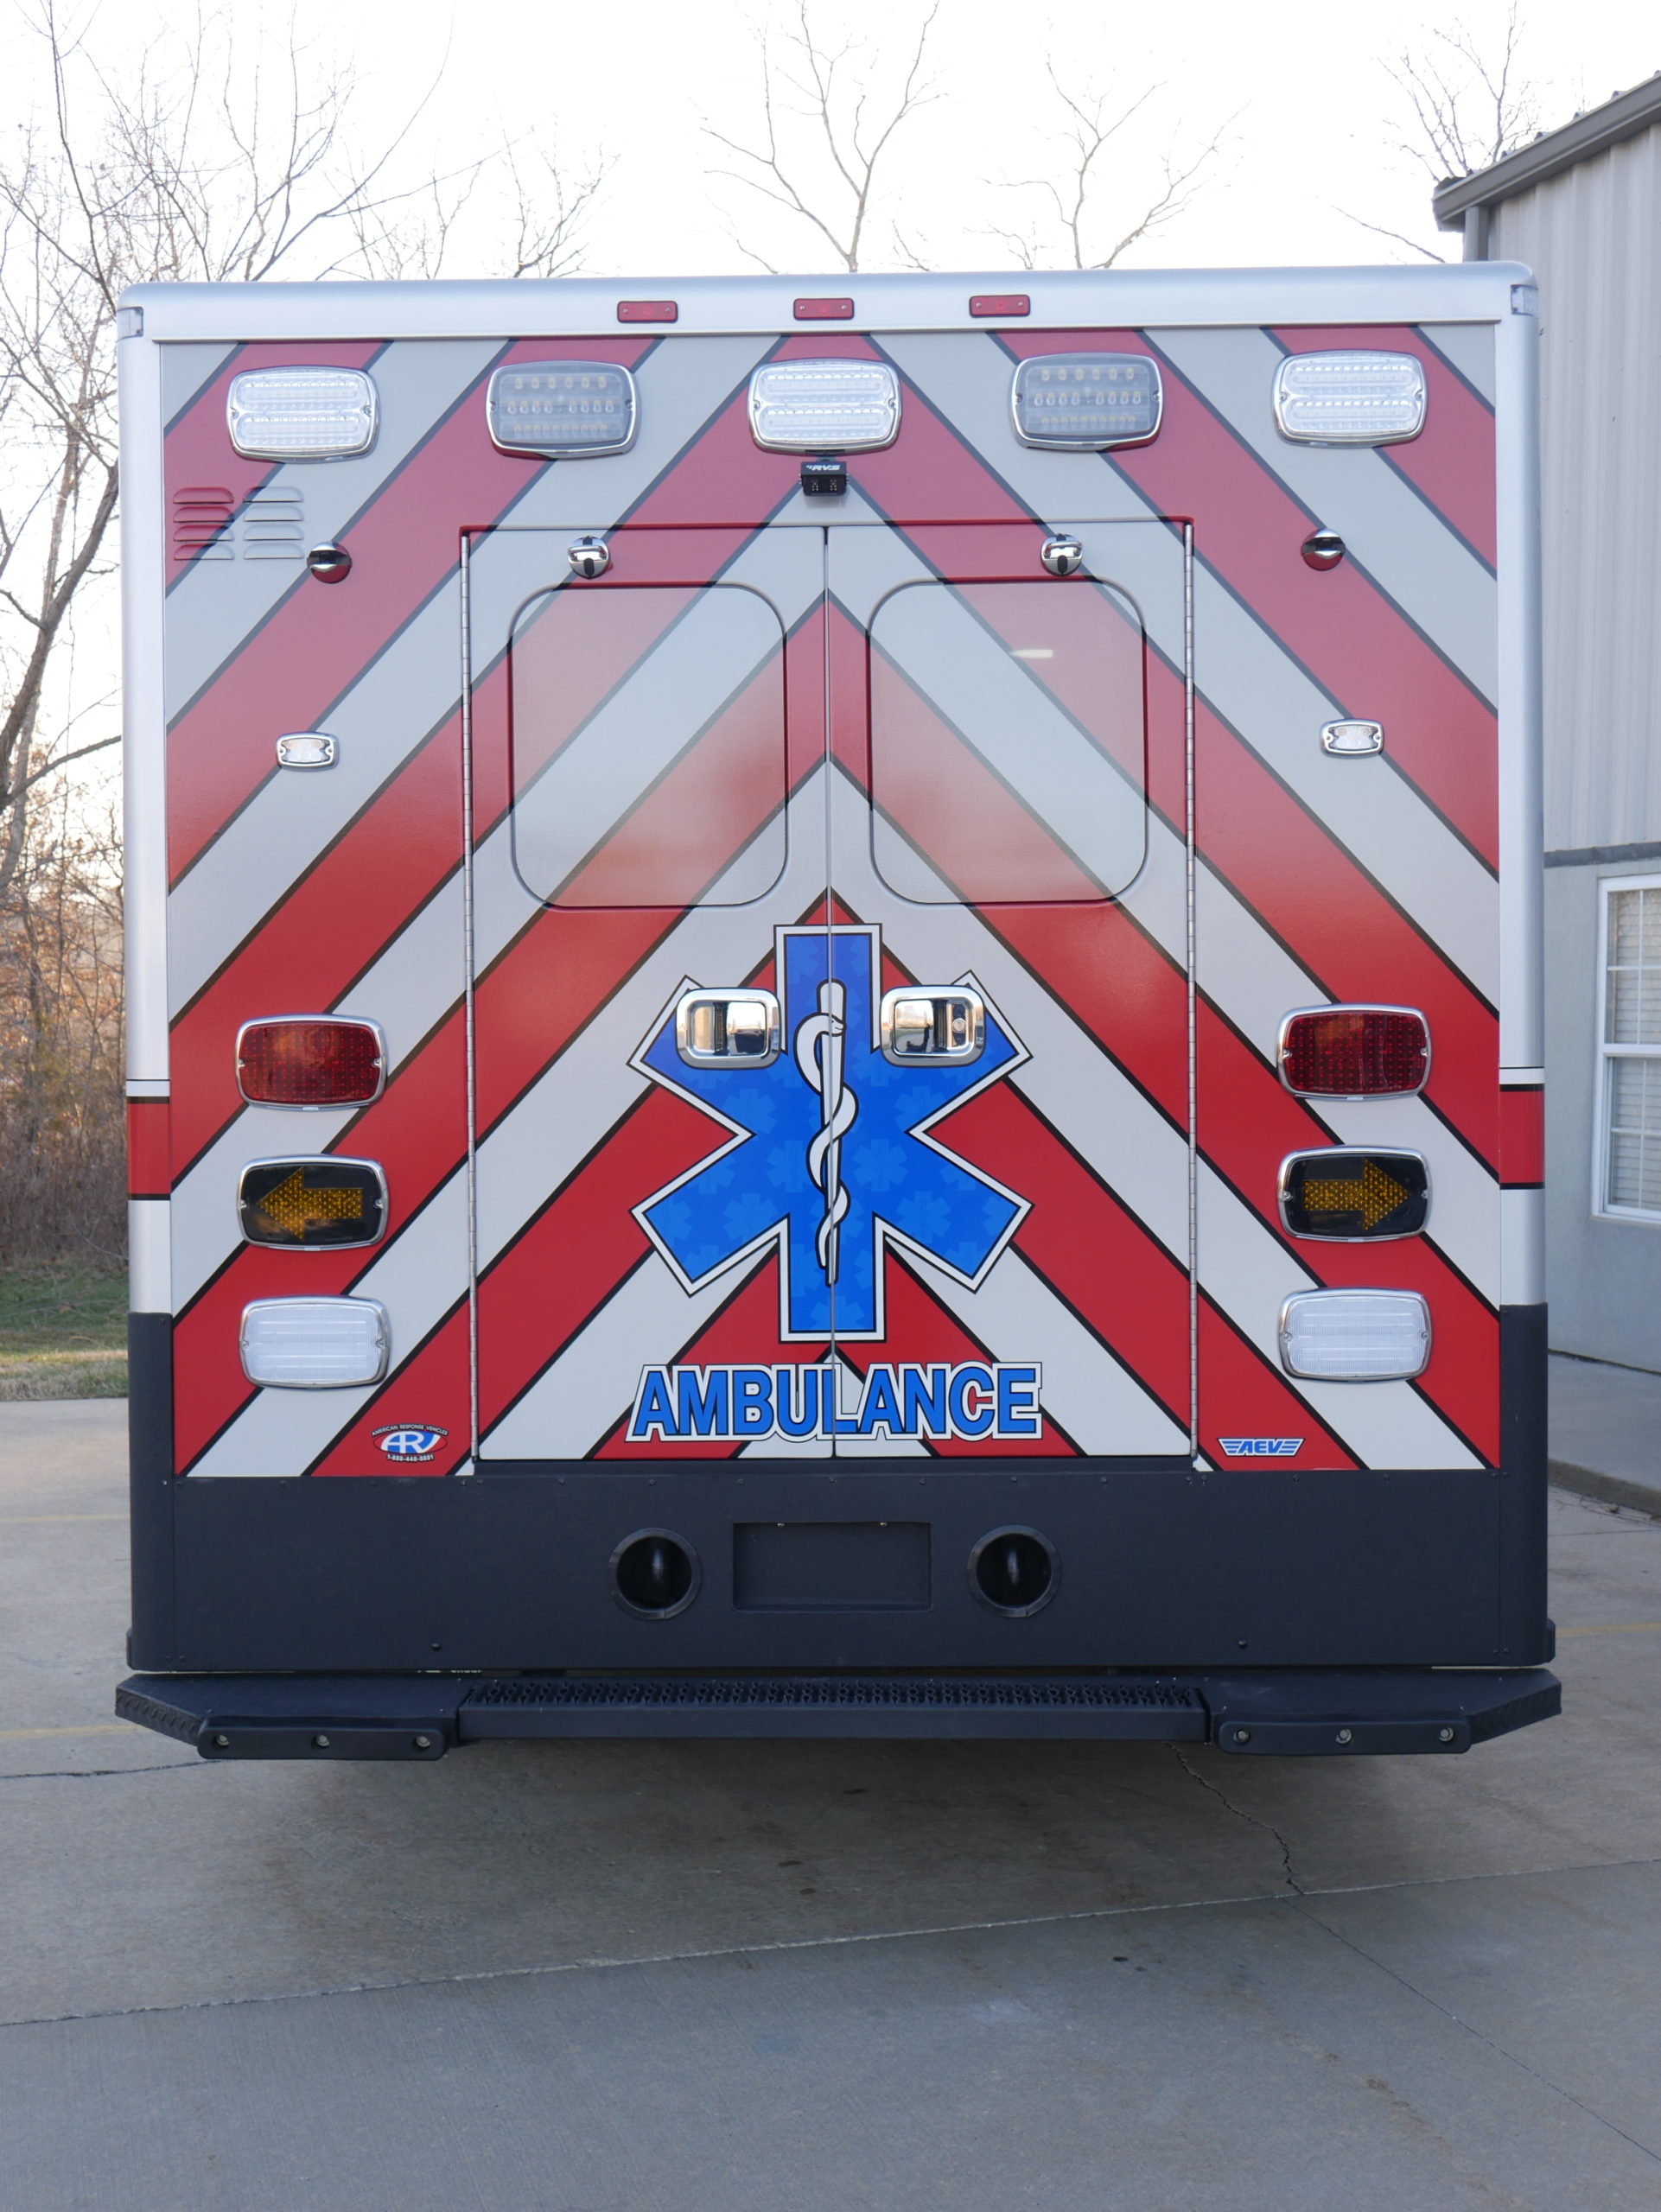 How Johnson County Ambulance Services adapt for game day - The